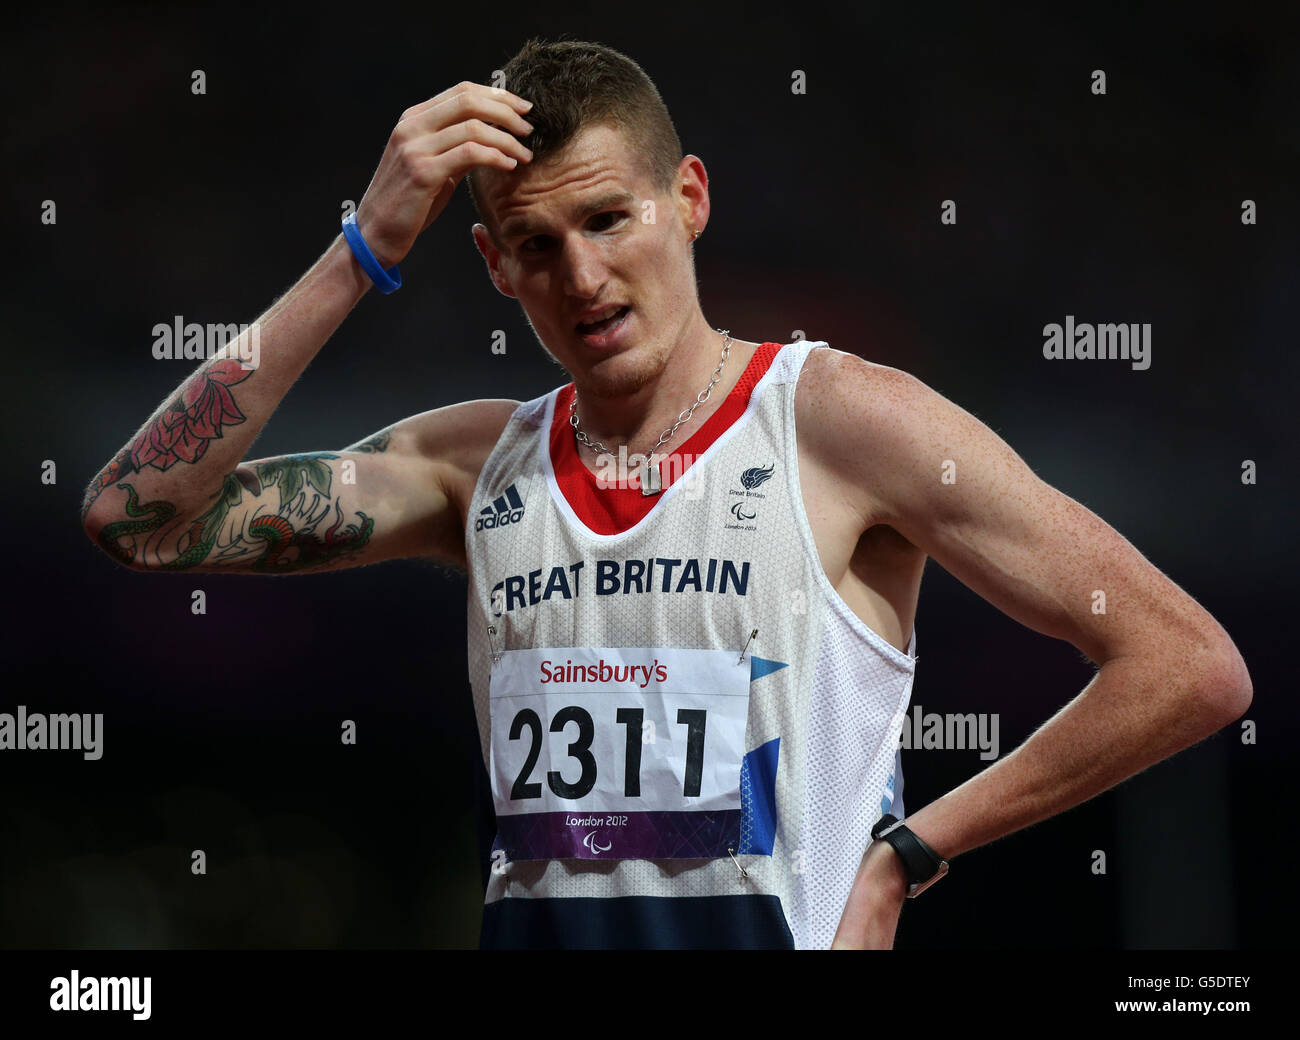 Great Britain's David Devine waits to find out his result, in which he won Bronze during the Men's 800m - T12 Final at the Olympic Stadium, London. Stock Photo